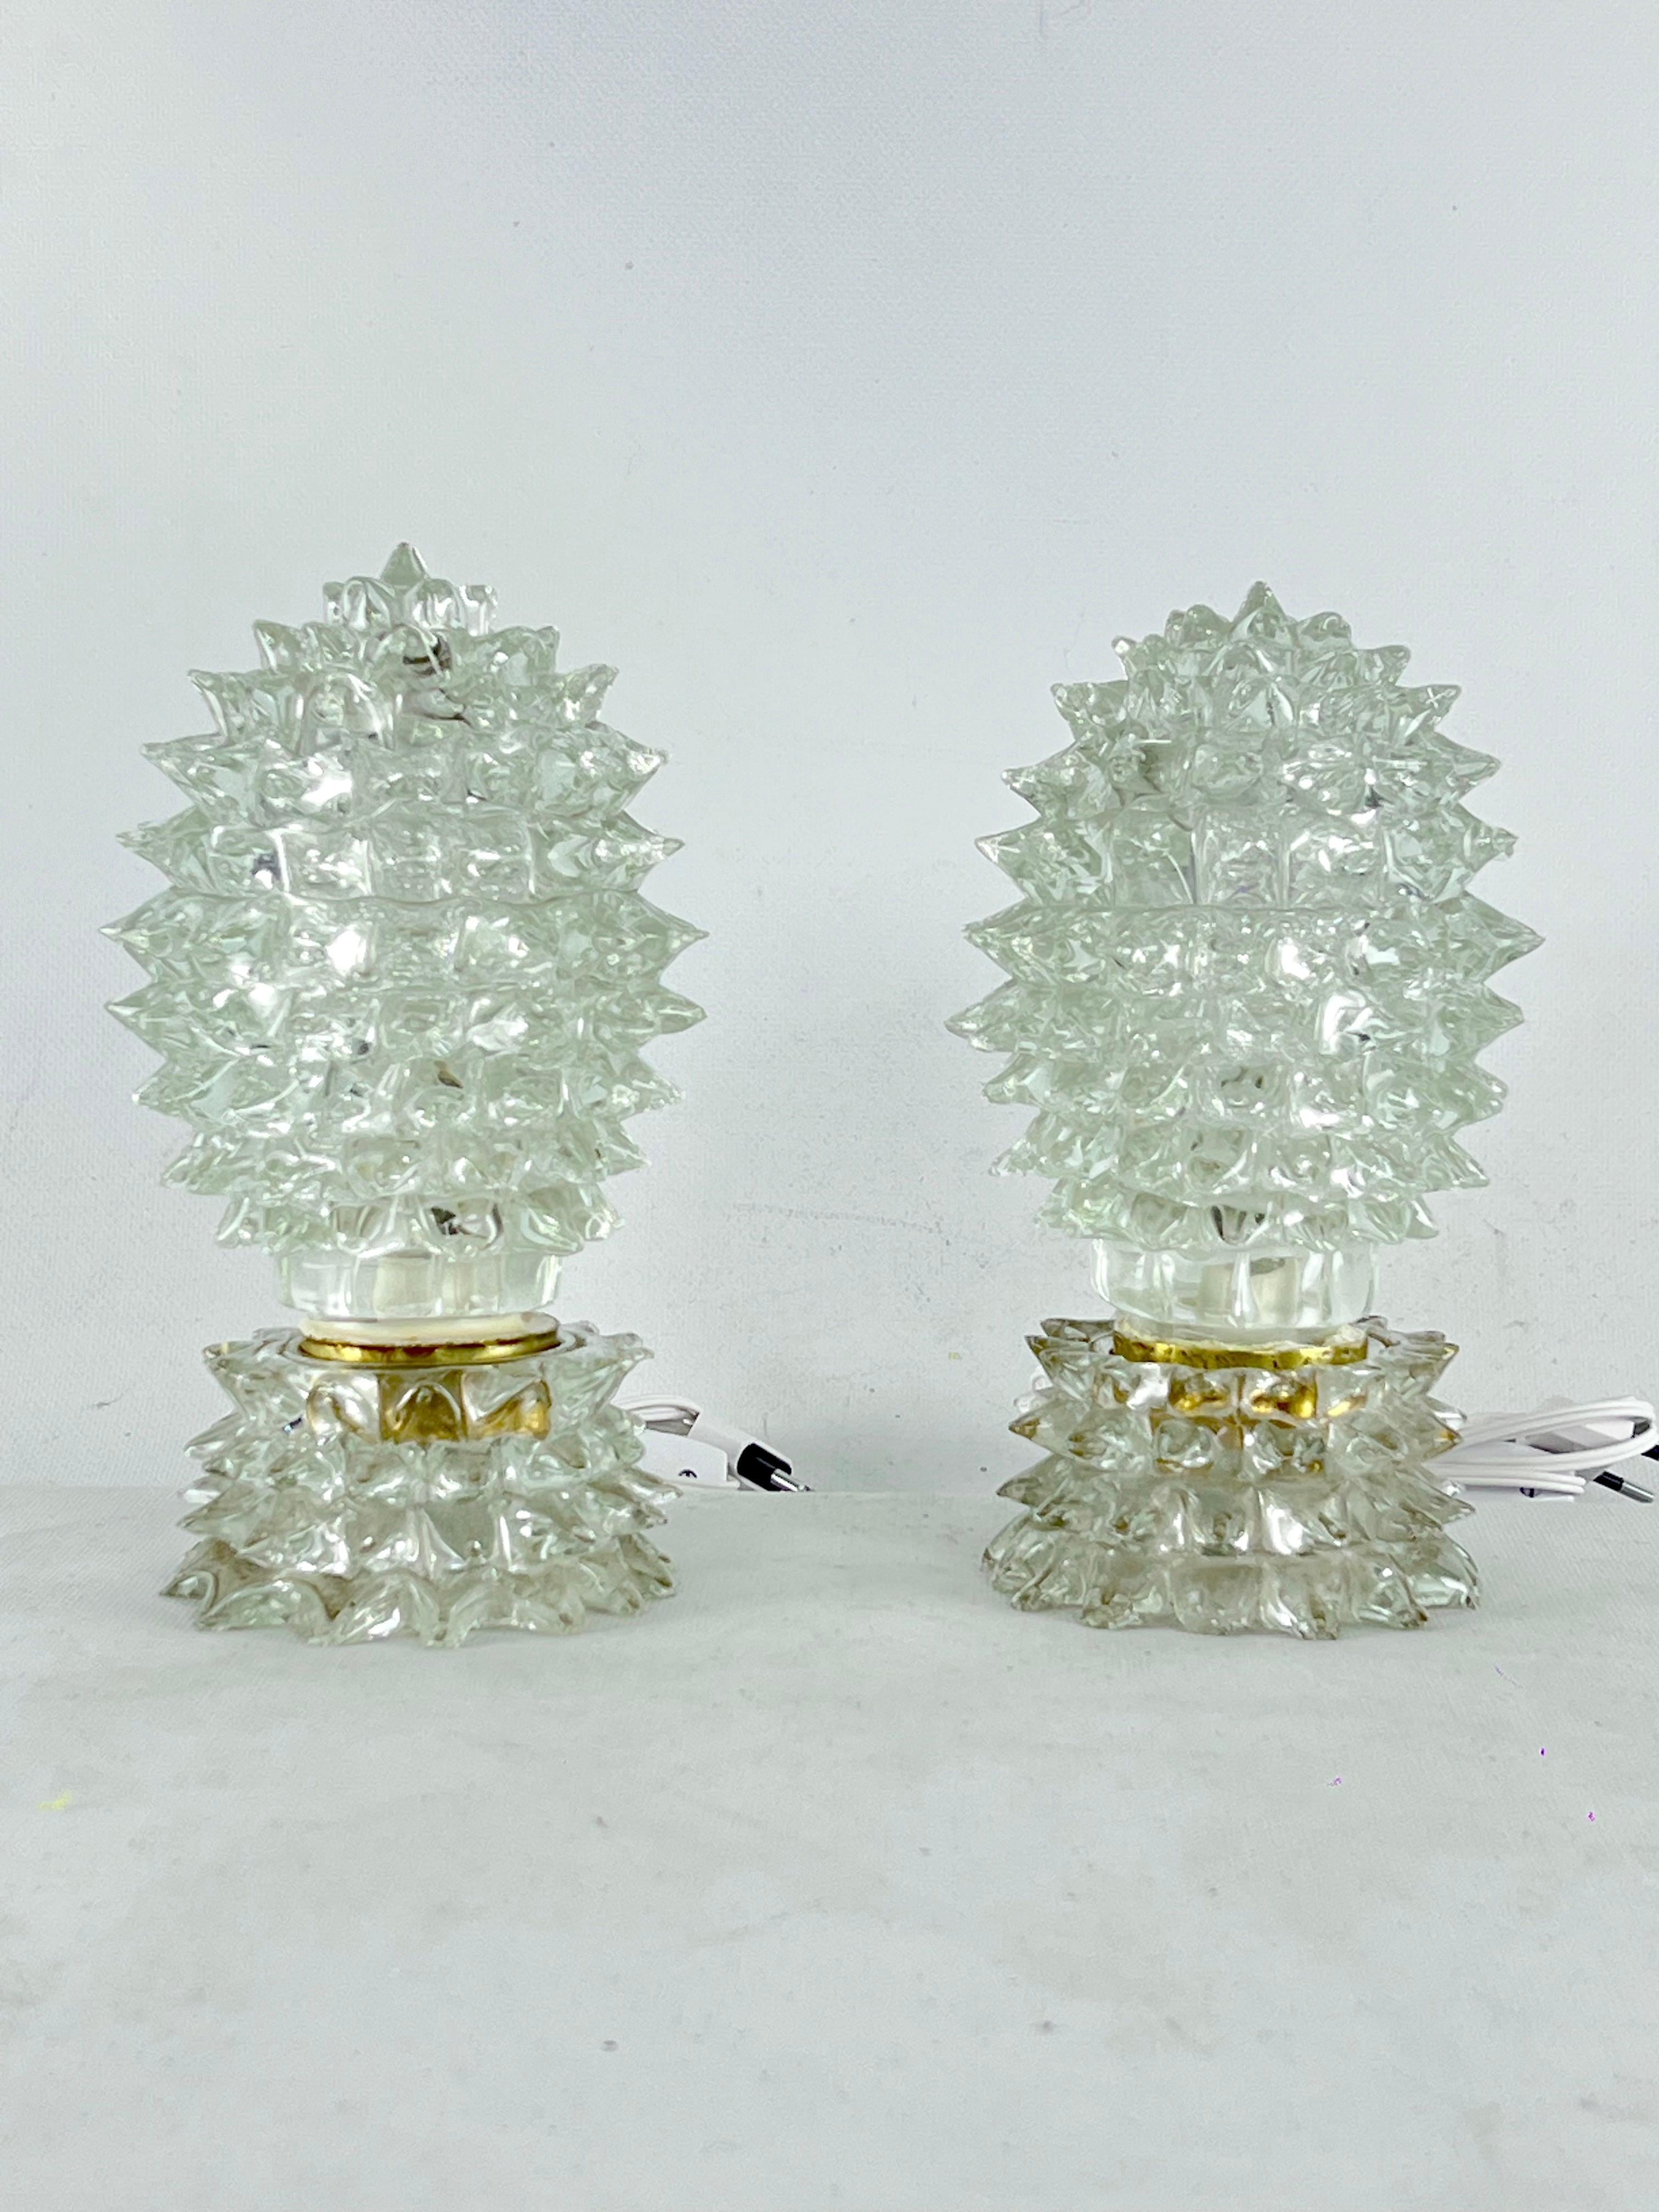 Great vintage condition for this rare pair of Ercole Barovier rostrato table lamps produced in Italy during the 1940s. No cracks or other damages but small chips in some tips. Full working with EU standard, adaptable on demand for USA standard.